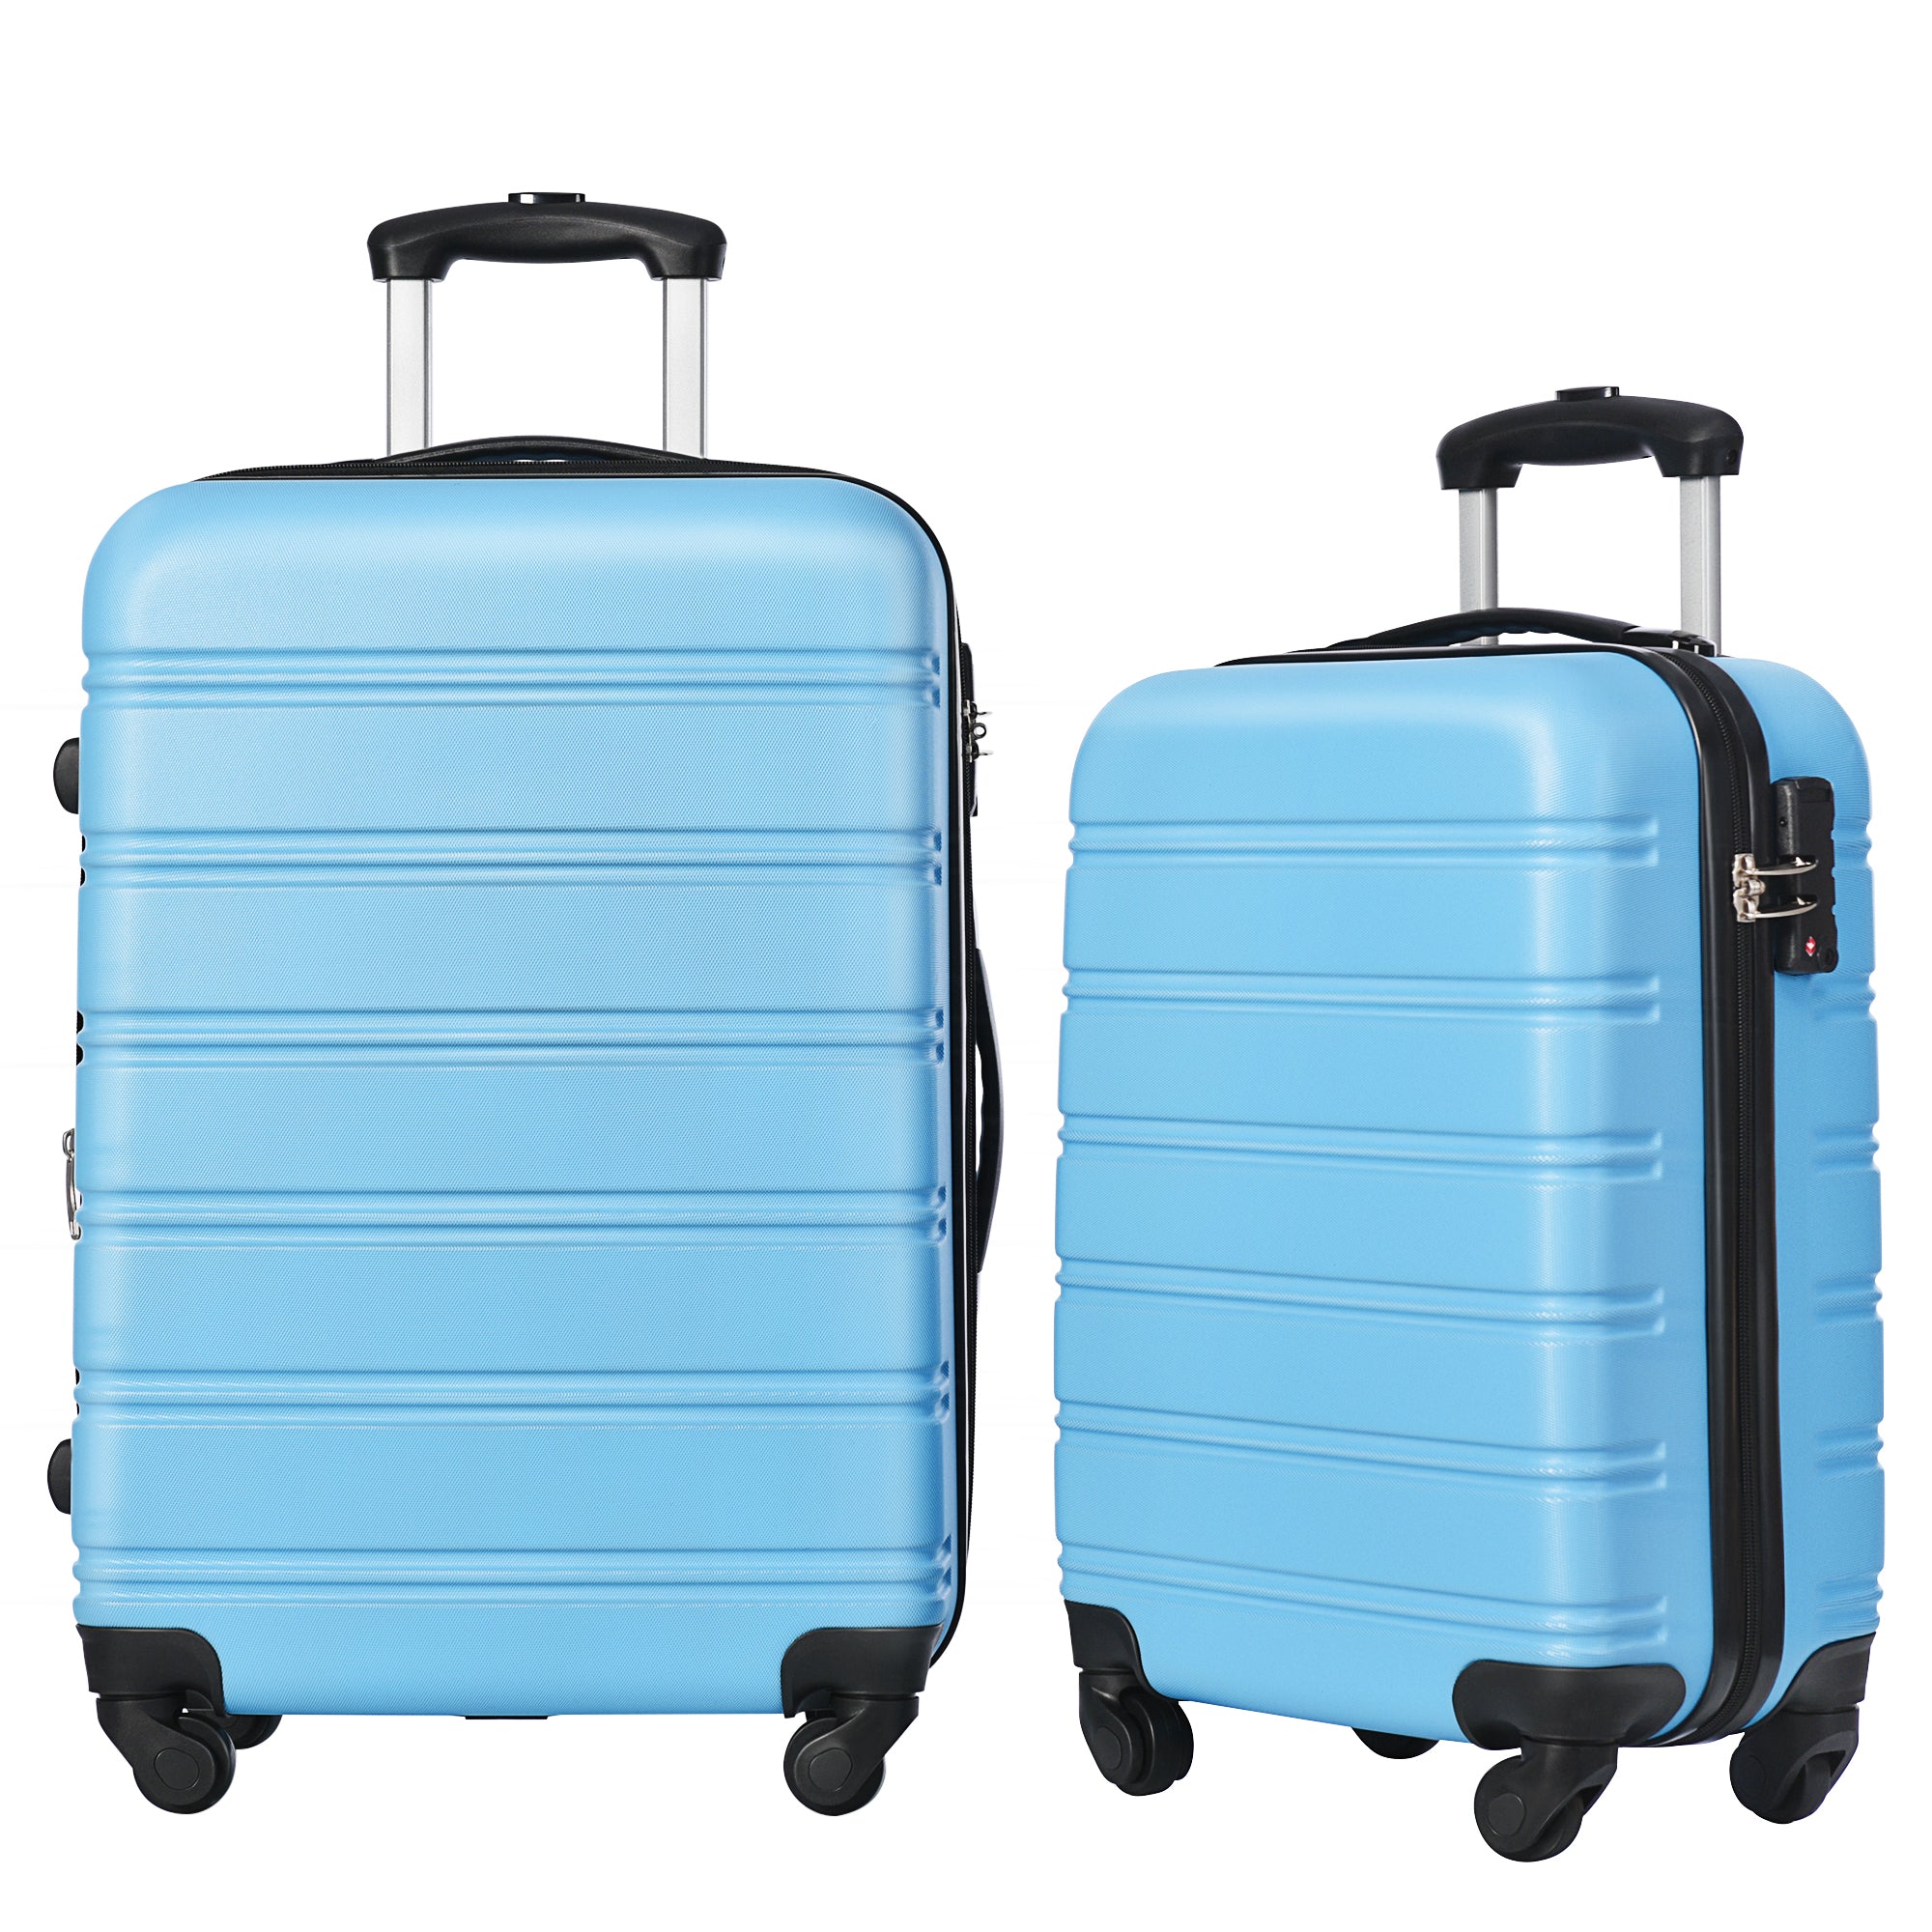 Luggage Sets of 2 Piece Carry on Suitcase Airline light blue-abs